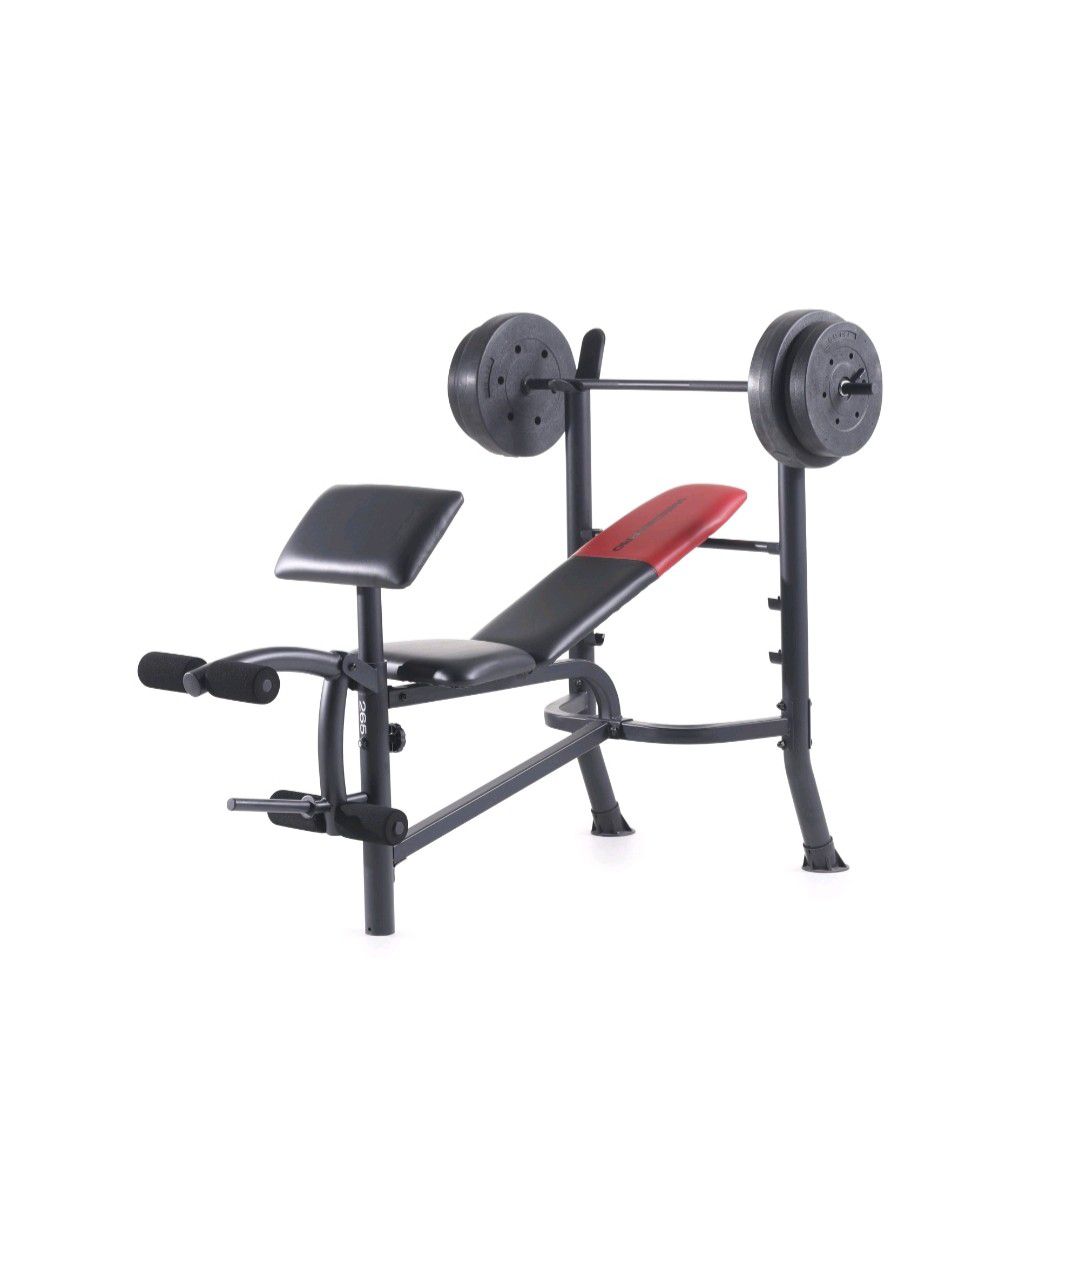 Weider Pro 265 Standard Bench with 80lbs